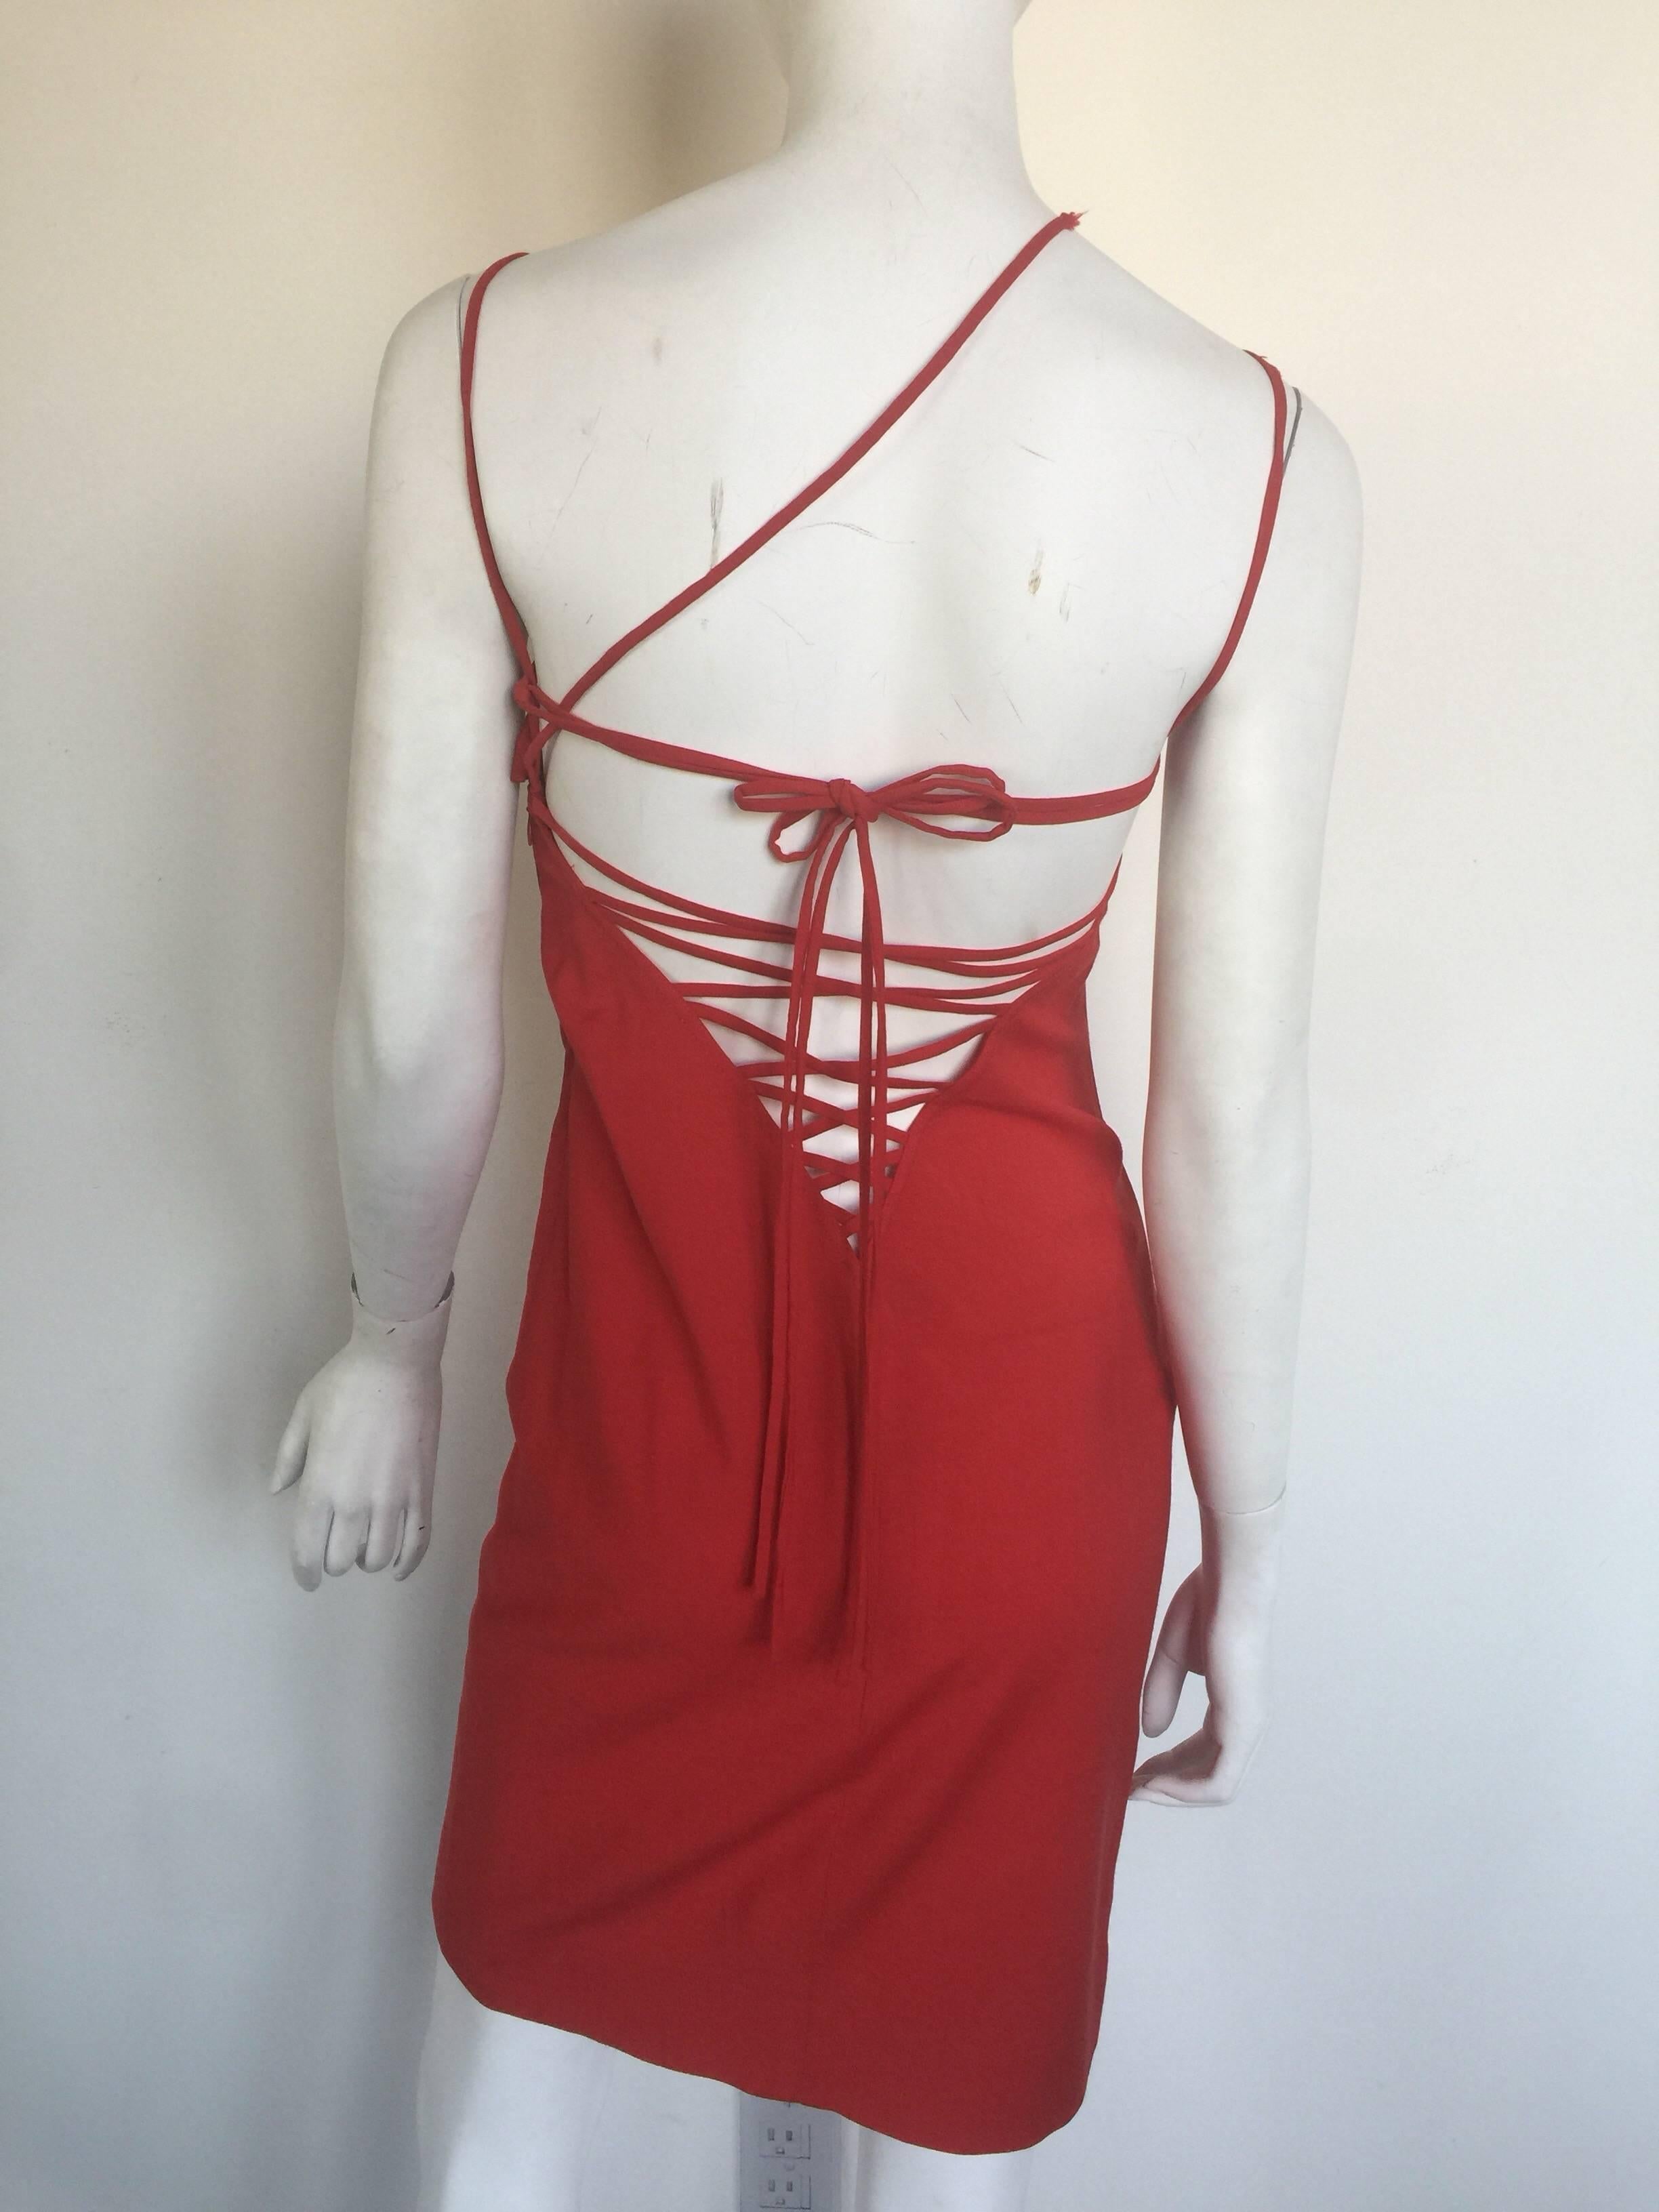 Women's or Men's Gianni Versace red mini dress  For Sale